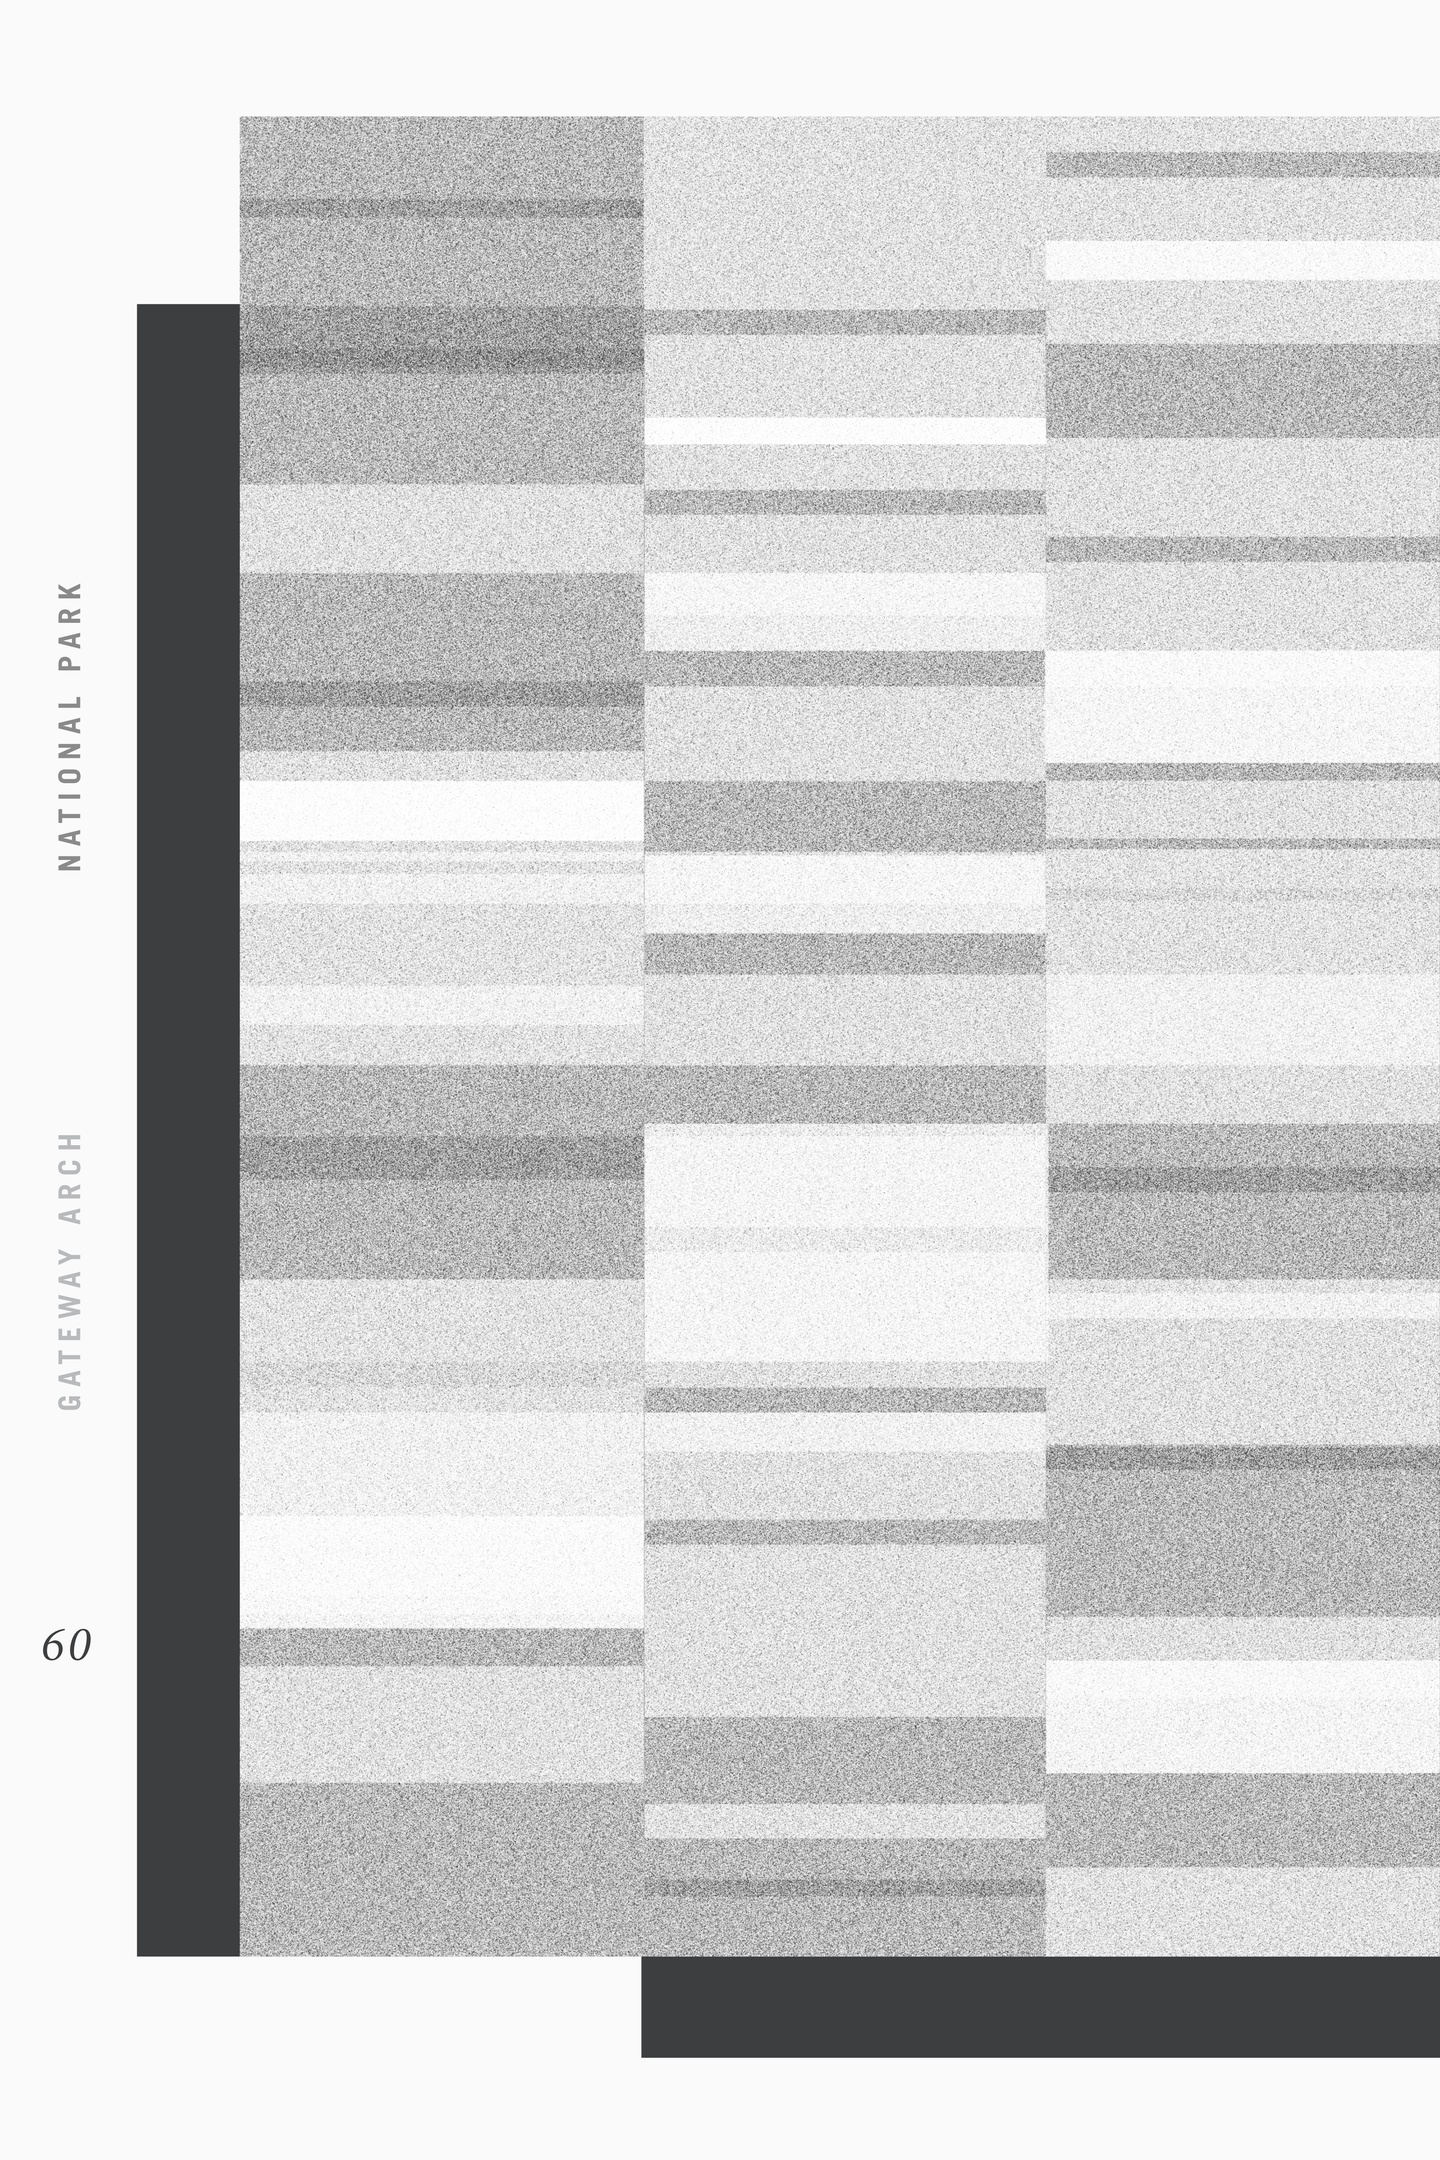 Three columns made of rectangles of varying shades of gray take up most of the page. Two long, dark gray rectangles hug the columns on the bottom and left side. The left contains text that reads "60 / GATEWAY ARCH / NATIONAL PARK"